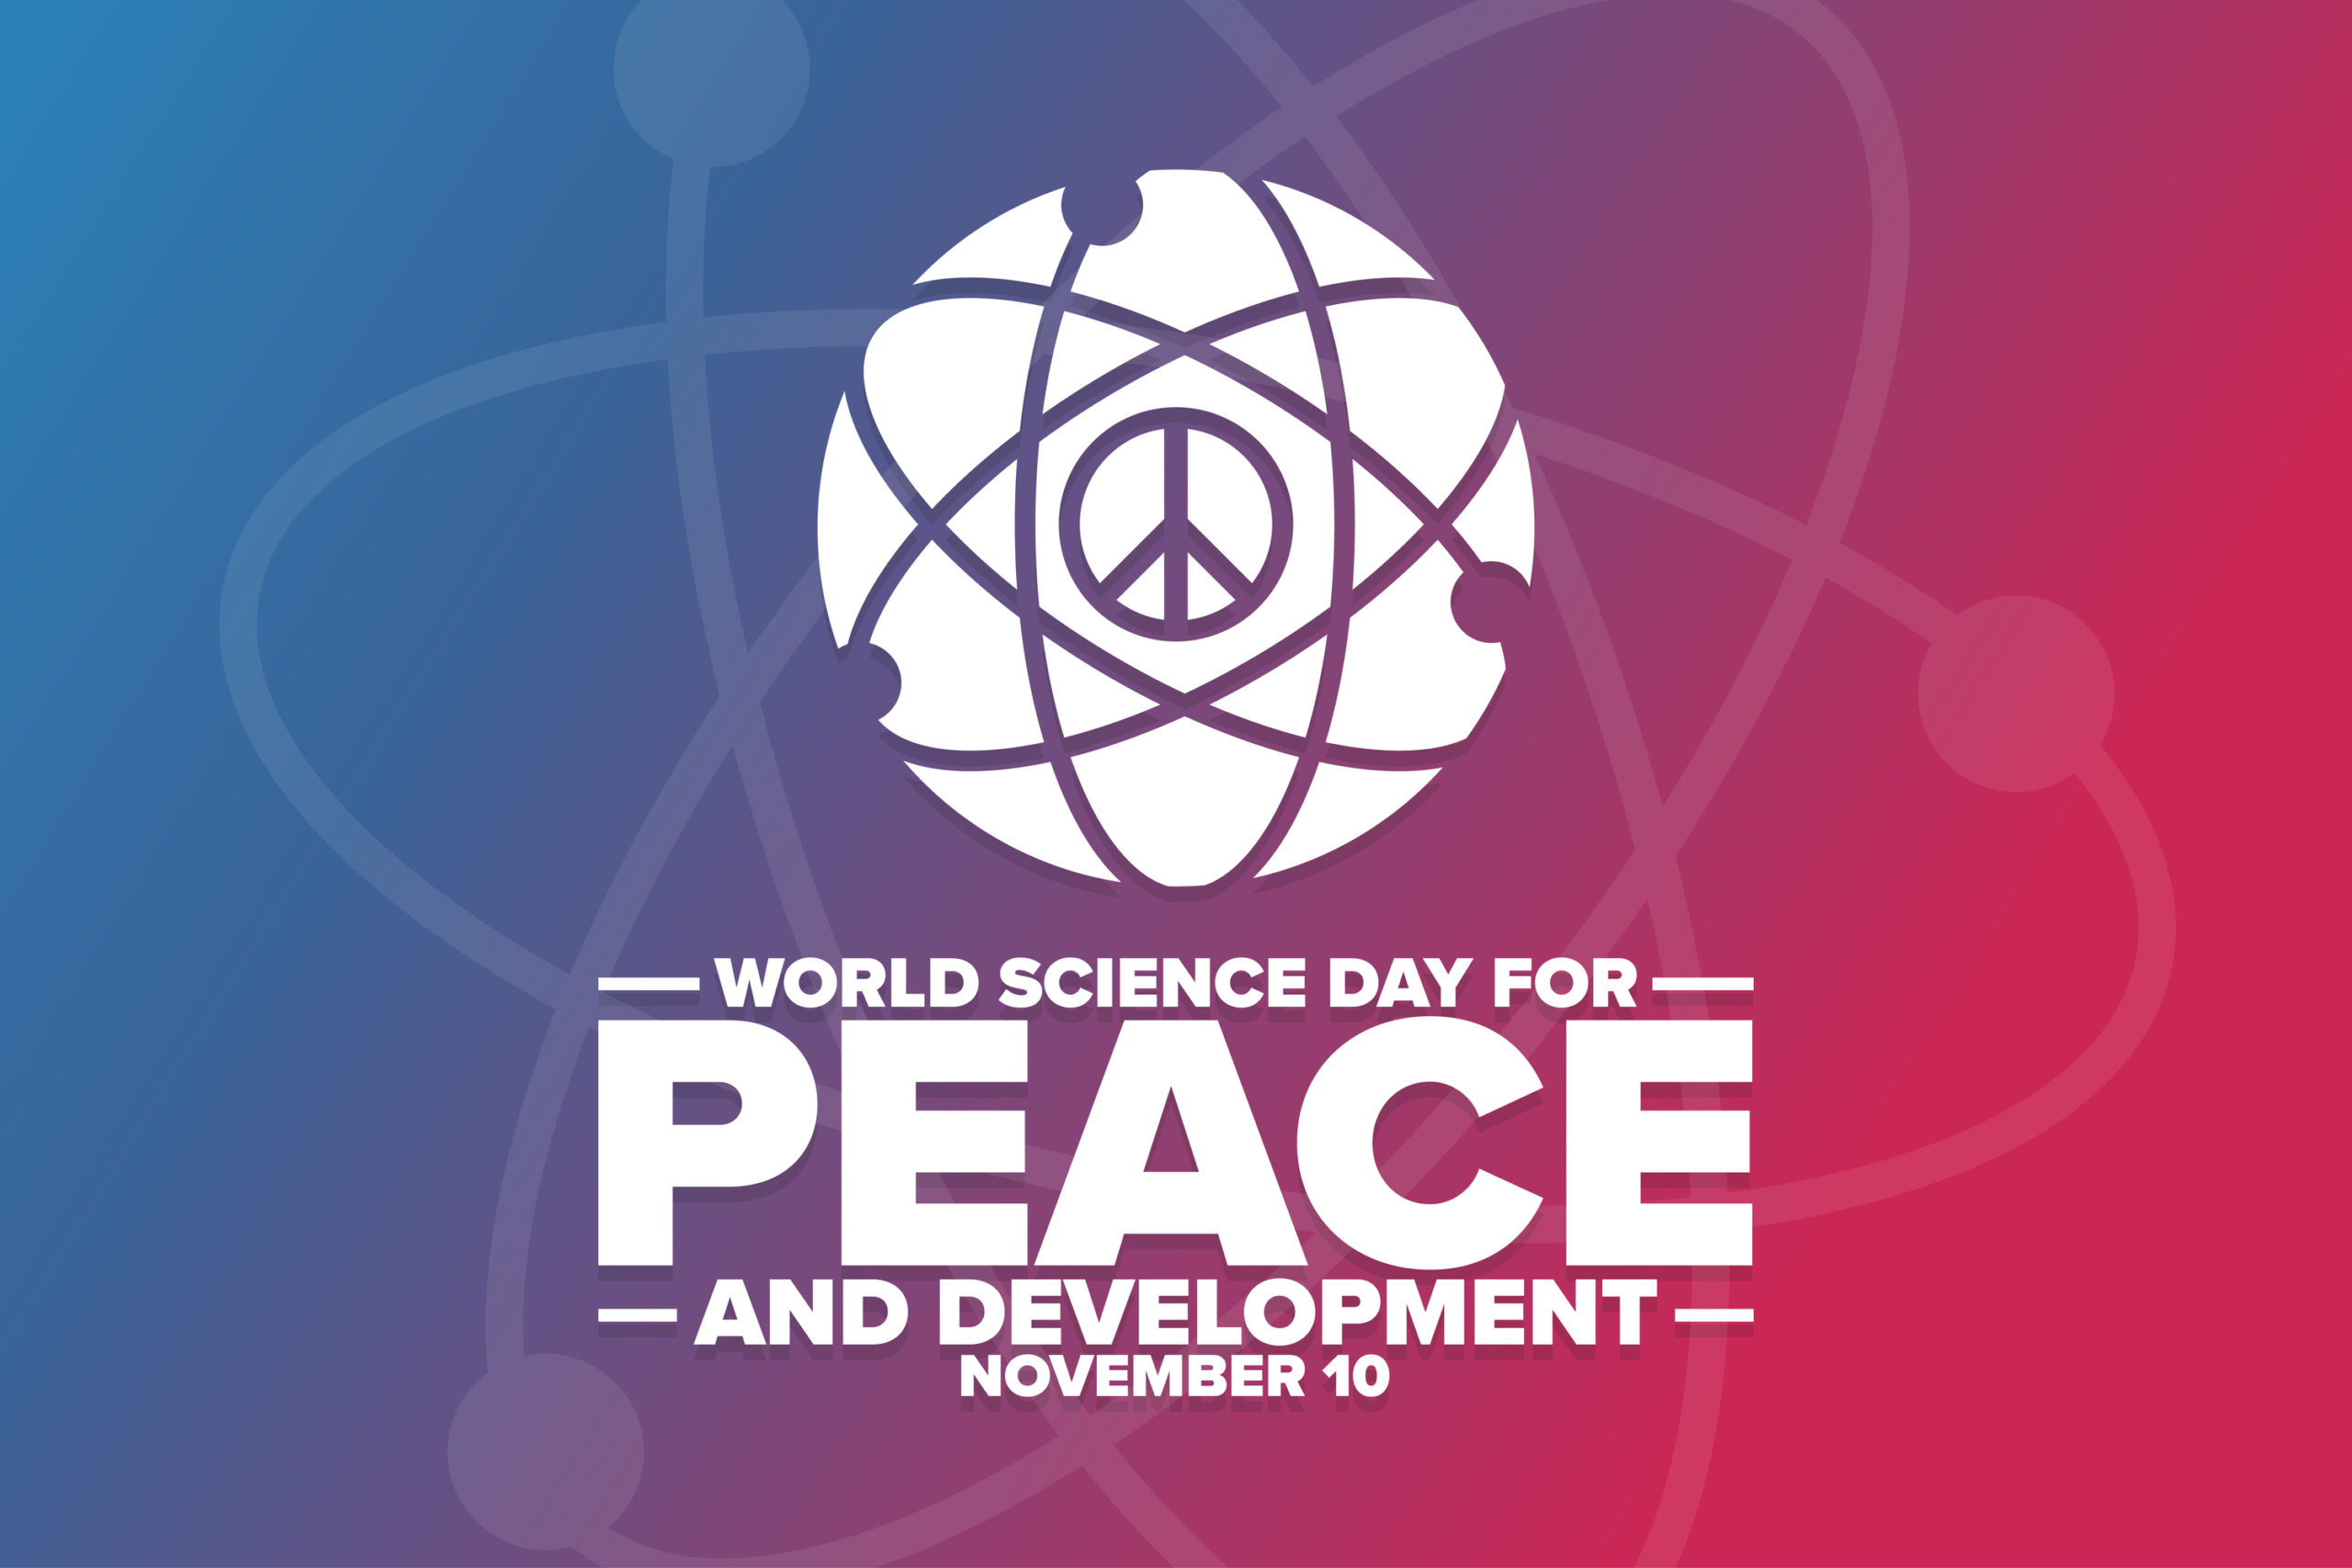 World Science Day for Peace and Development observed on 10 November